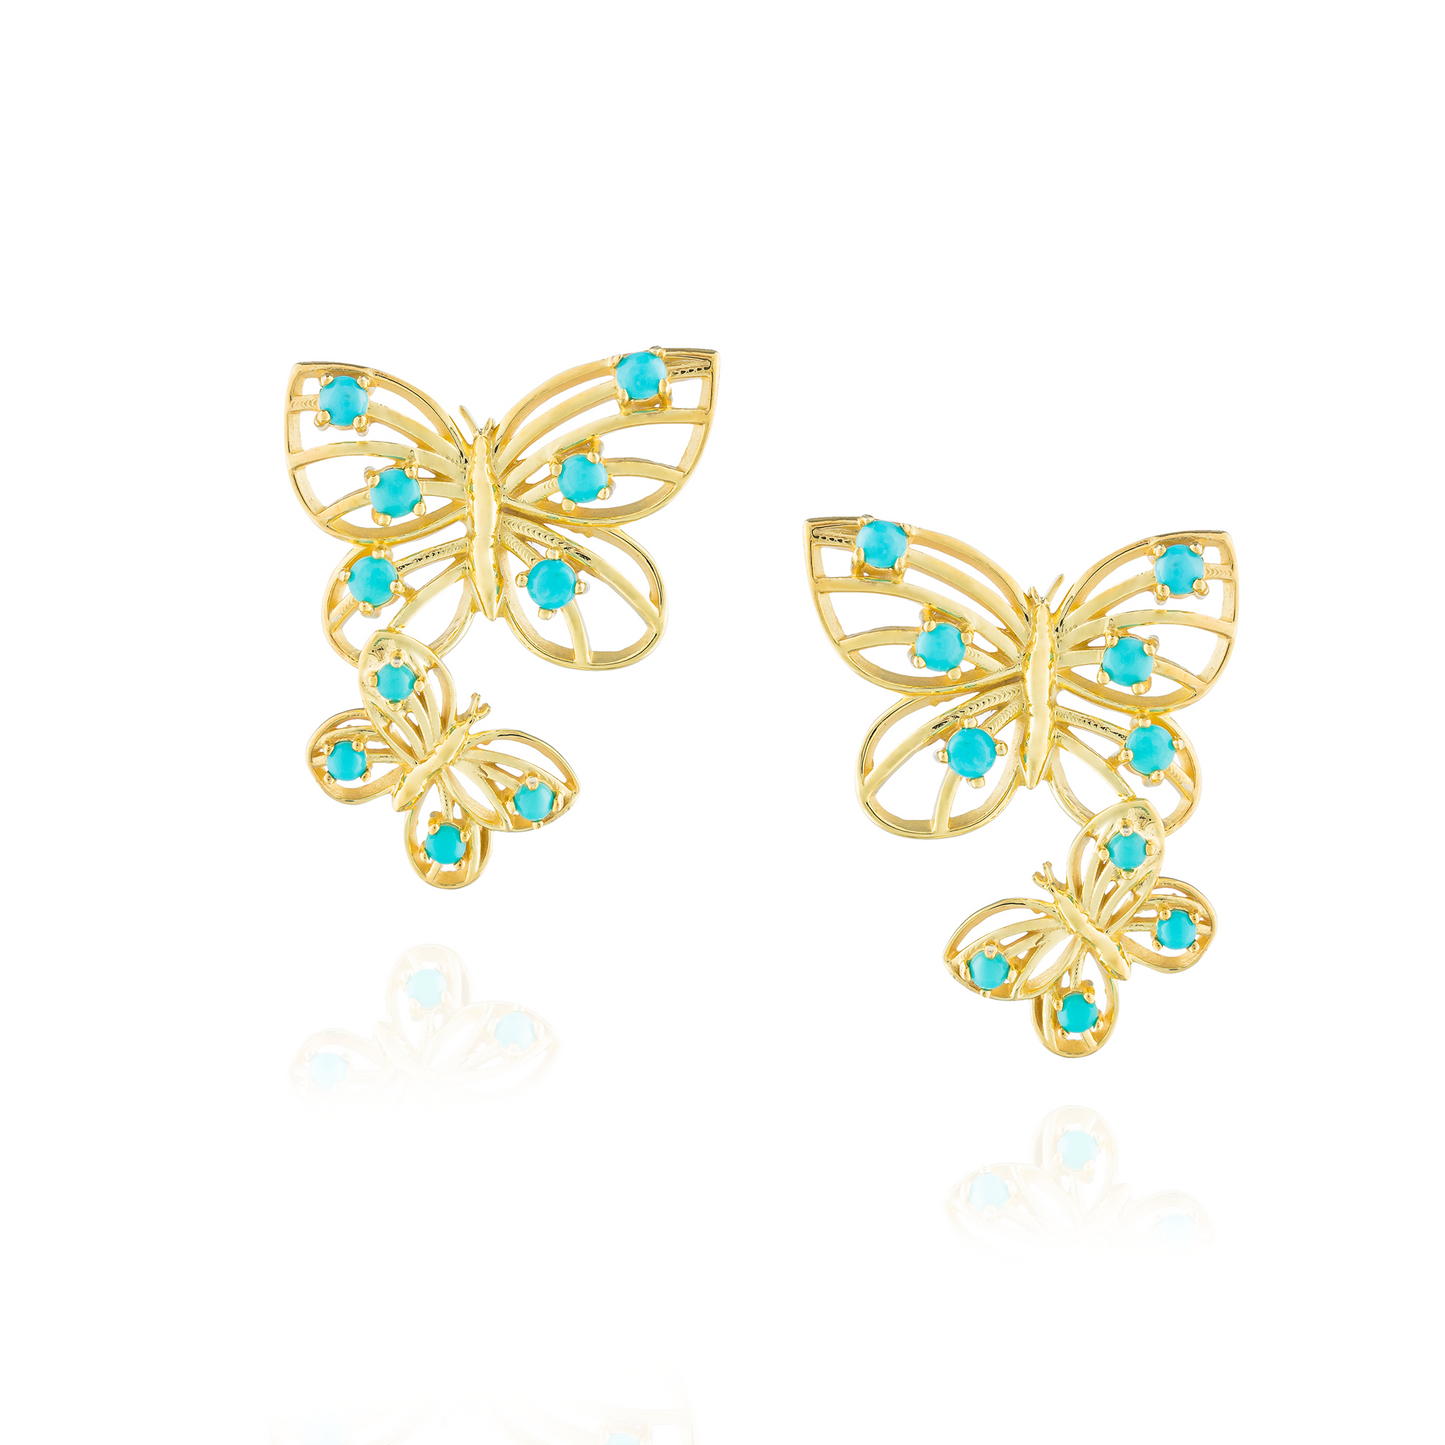 925 Silver Earrings  plated in 18k Yellow Gold with Turquoise Cabouchon